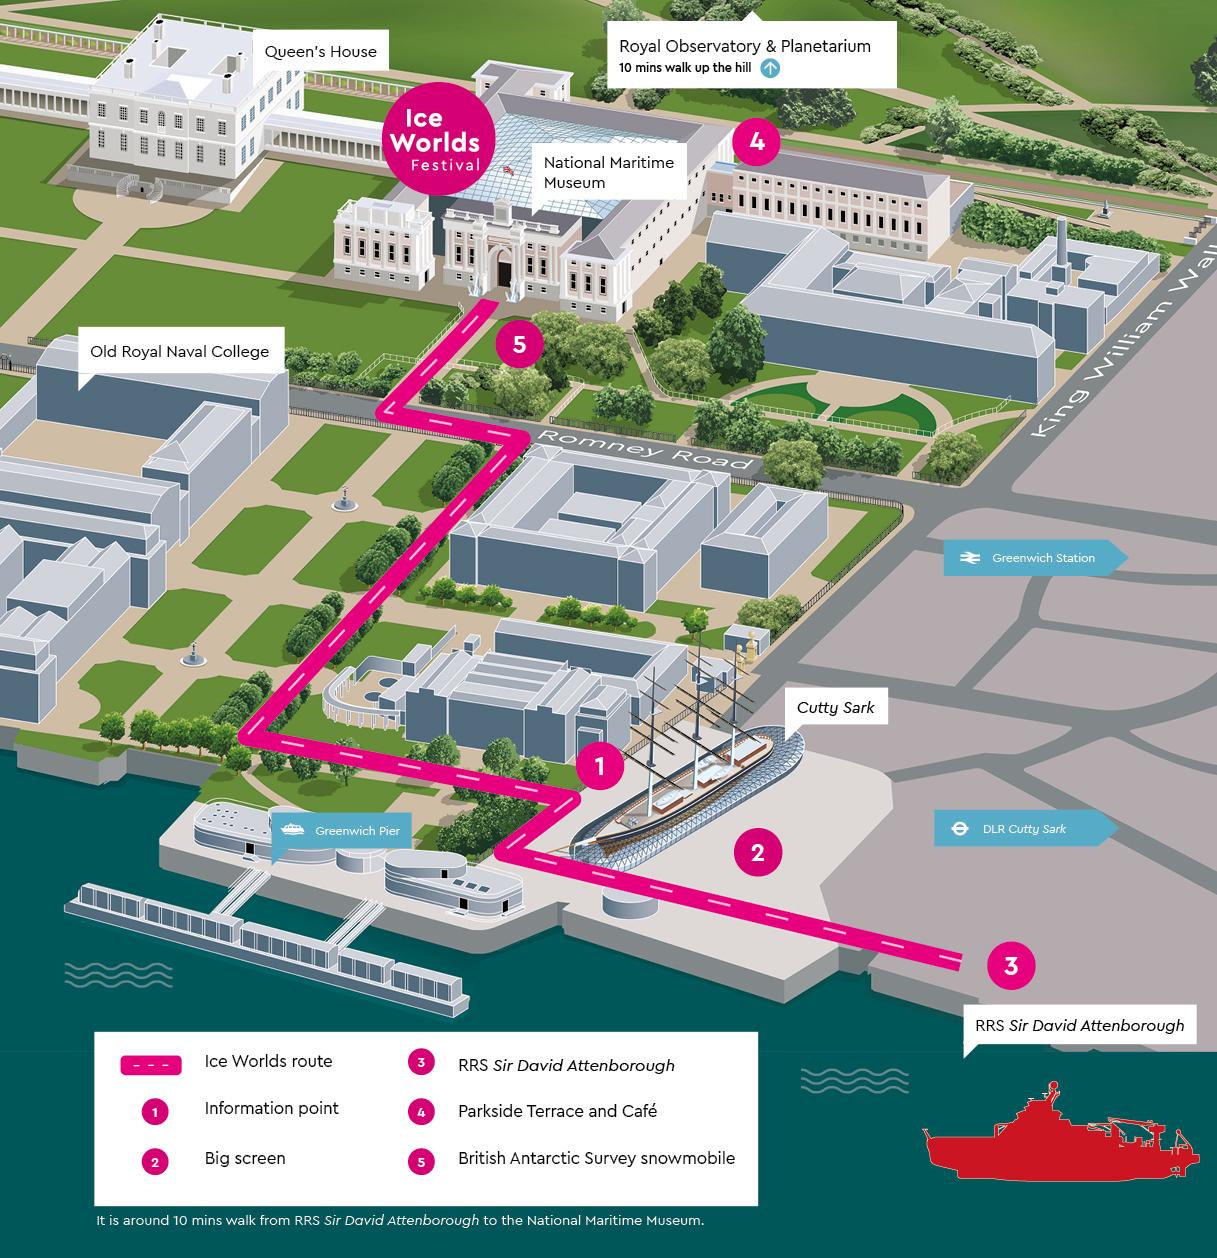 A map of Greenwich, with a route from the RRS Sir David Attenborough to the National Maritime Museum highlighted in pink